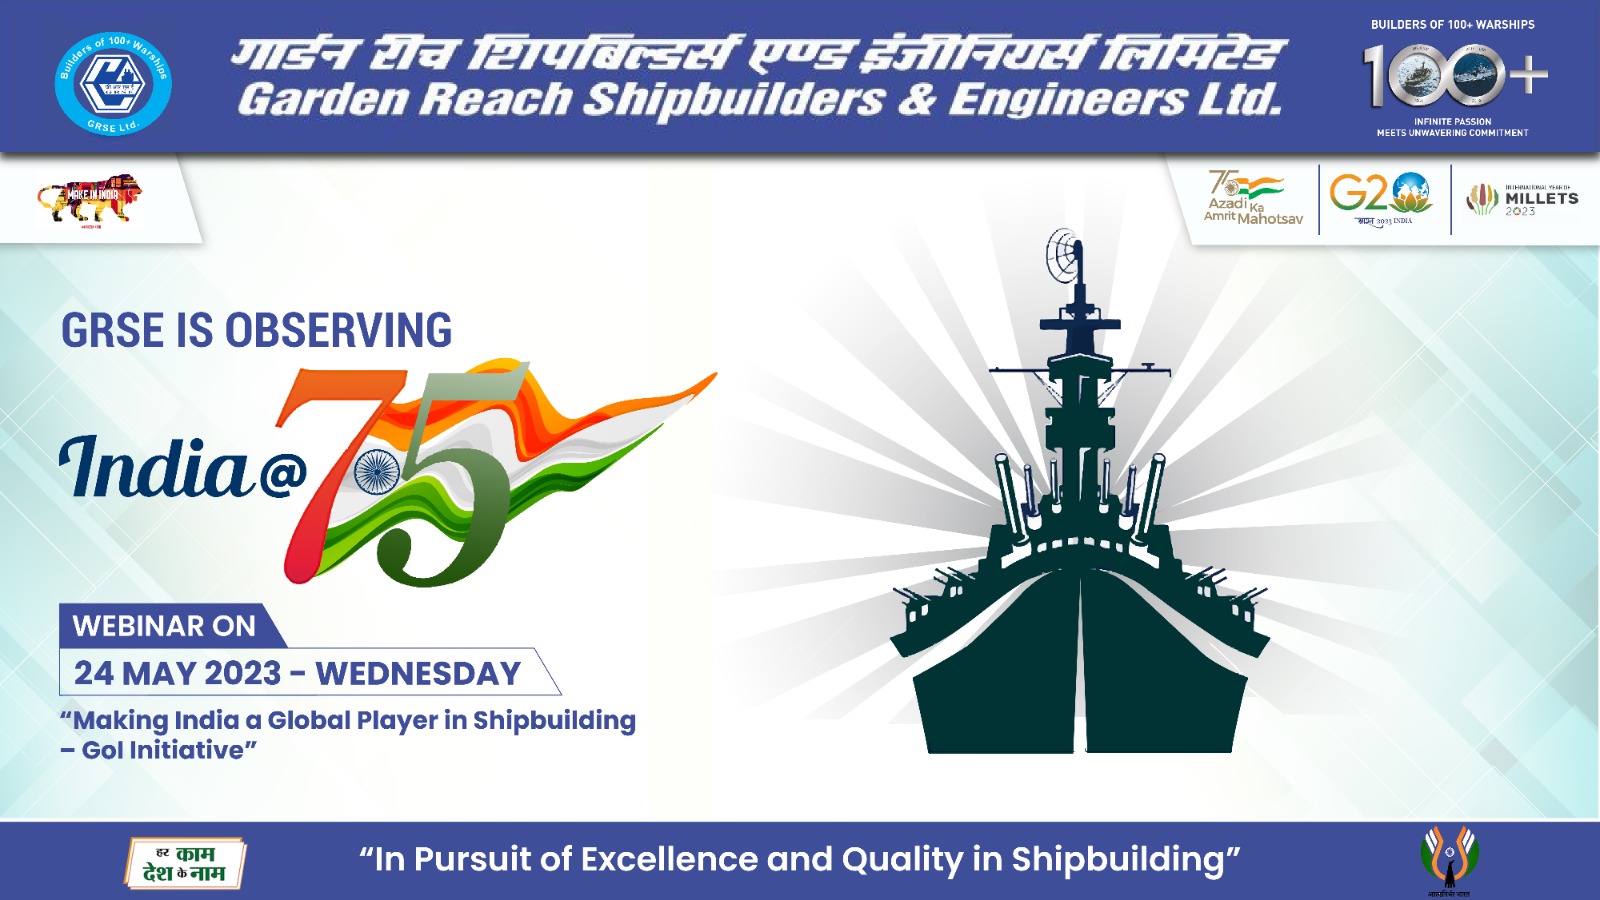 India@75 - Phase X Webinar on Making India a Global player in Shipbuilding - GOI Initiative on 24 May 23